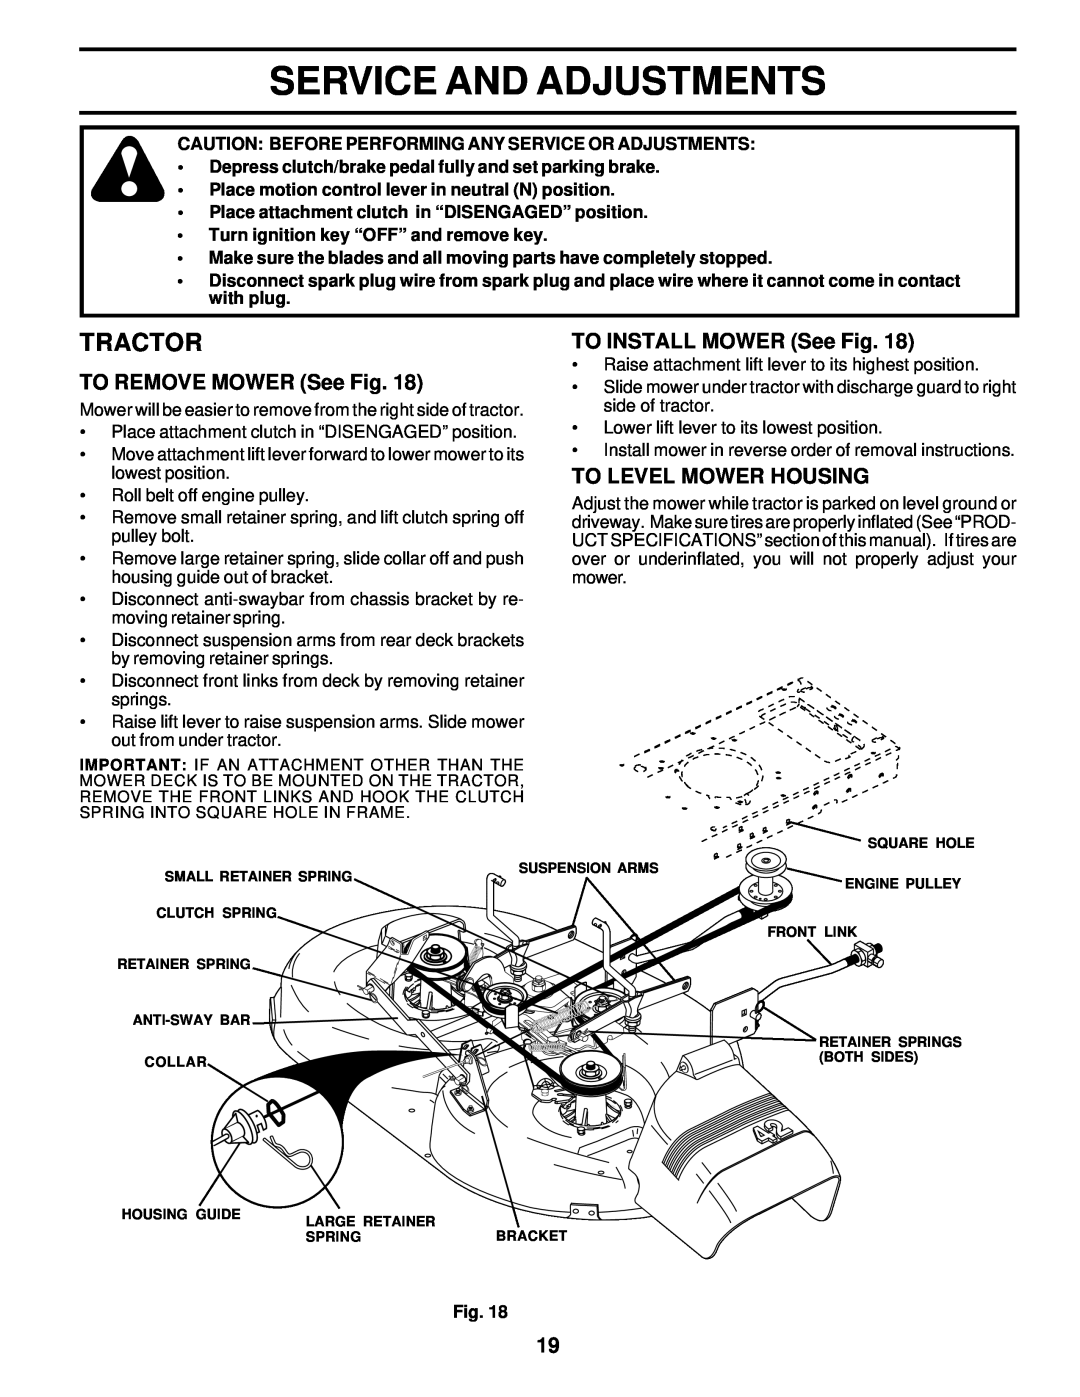 Poulan 177552 Service And Adjustments, TO REMOVE MOWER See Fig, TO INSTALL MOWER See Fig, To Level Mower Housing, Tractor 